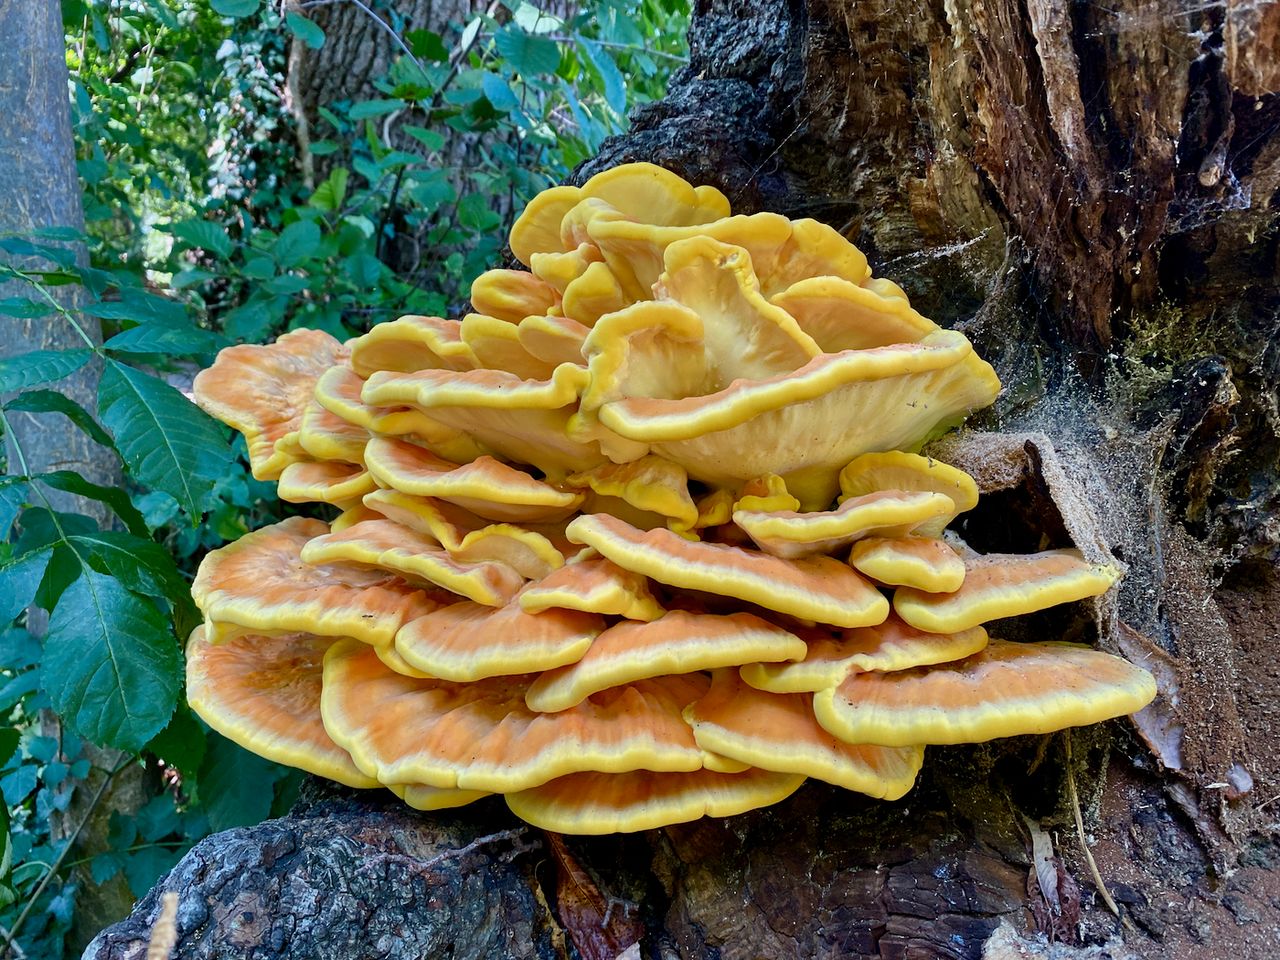 A close-up of a fully-bloomed specimen of Laetiporus sulphureus featuring about 10 layers, all emerging from the bottom end of an overturned tree.